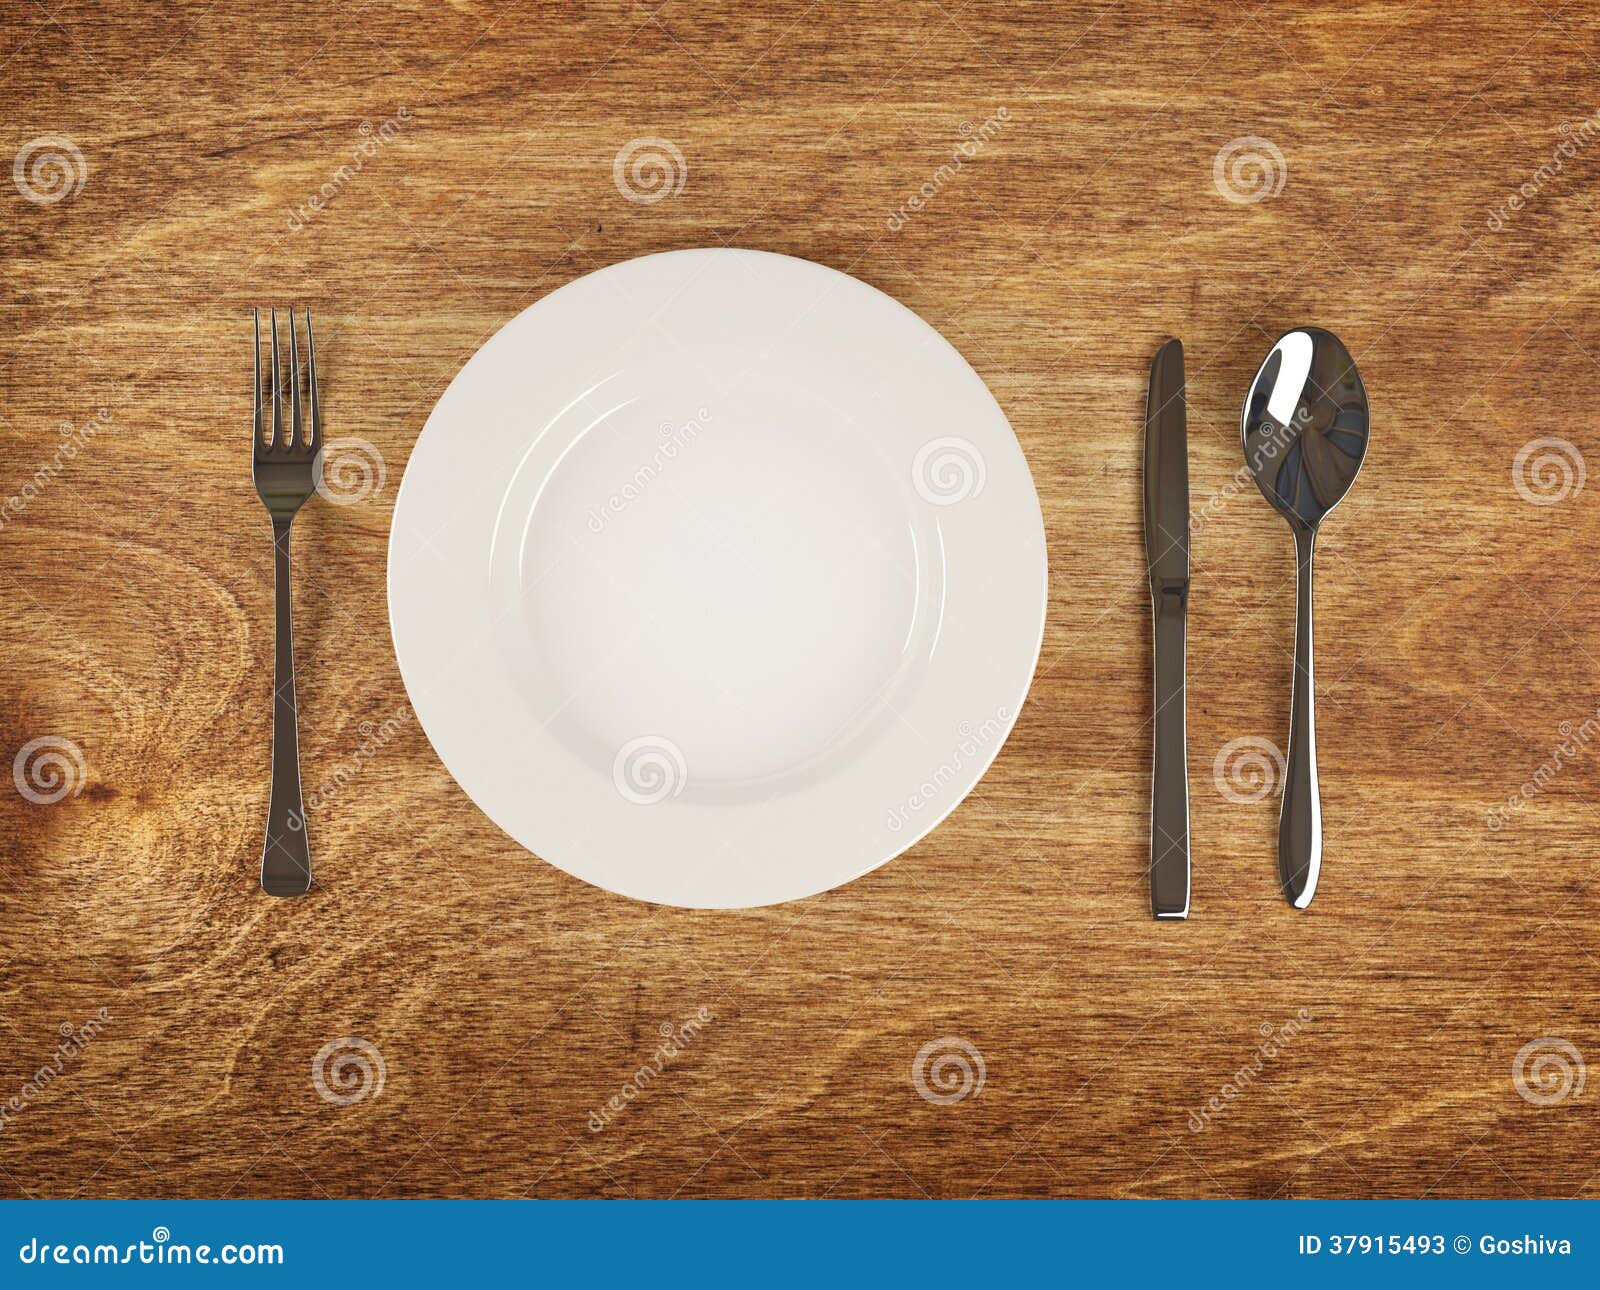 plate and flatware on wooden table